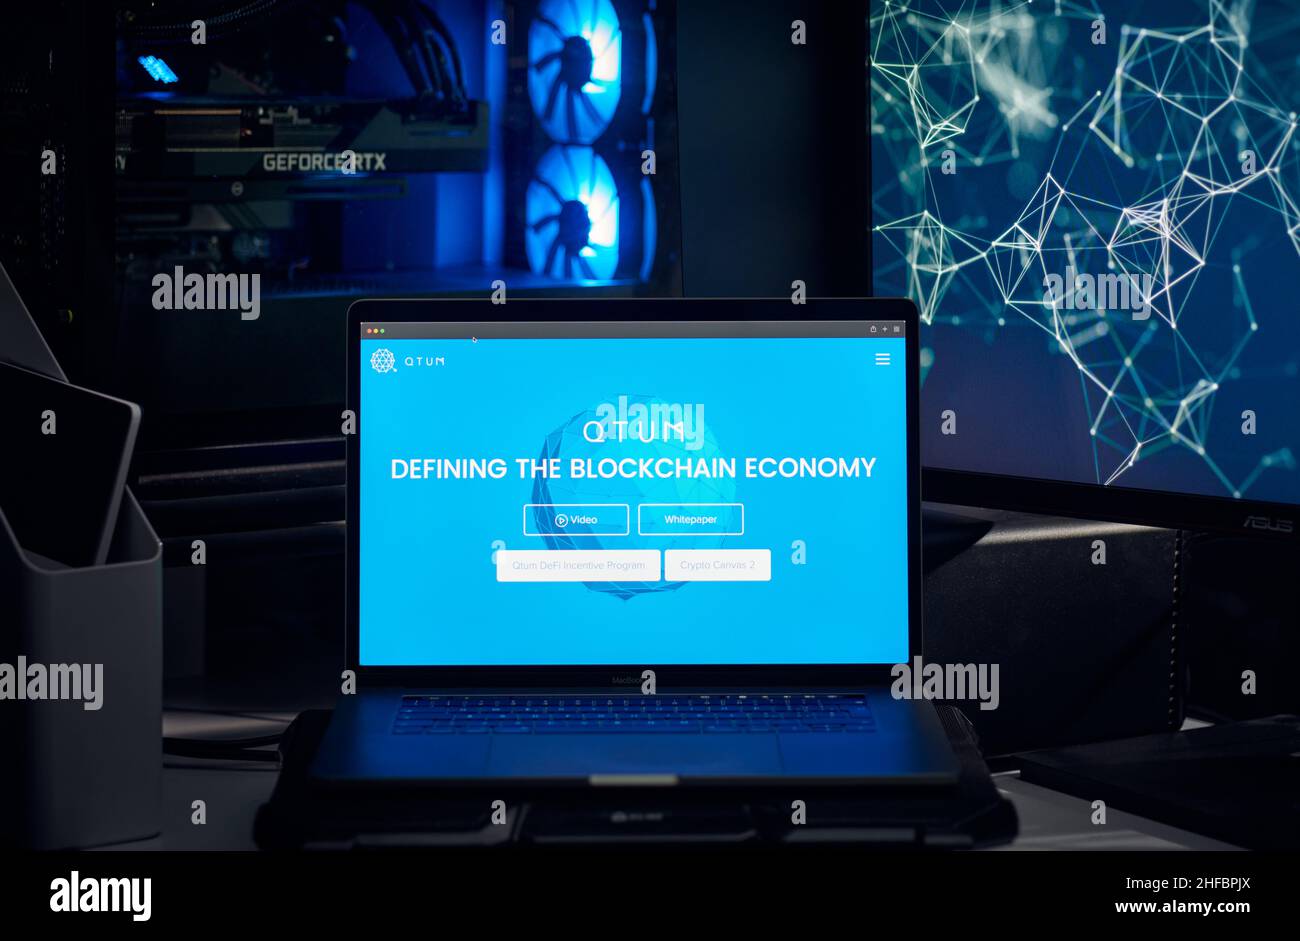 Milan, Italy - January 11, 2022: qtum - QTUM website's hp seen on a laptop screen. qtum, QTUM coin logo visible. Cryptocurrency, defi, nft concepts il Stock Photo